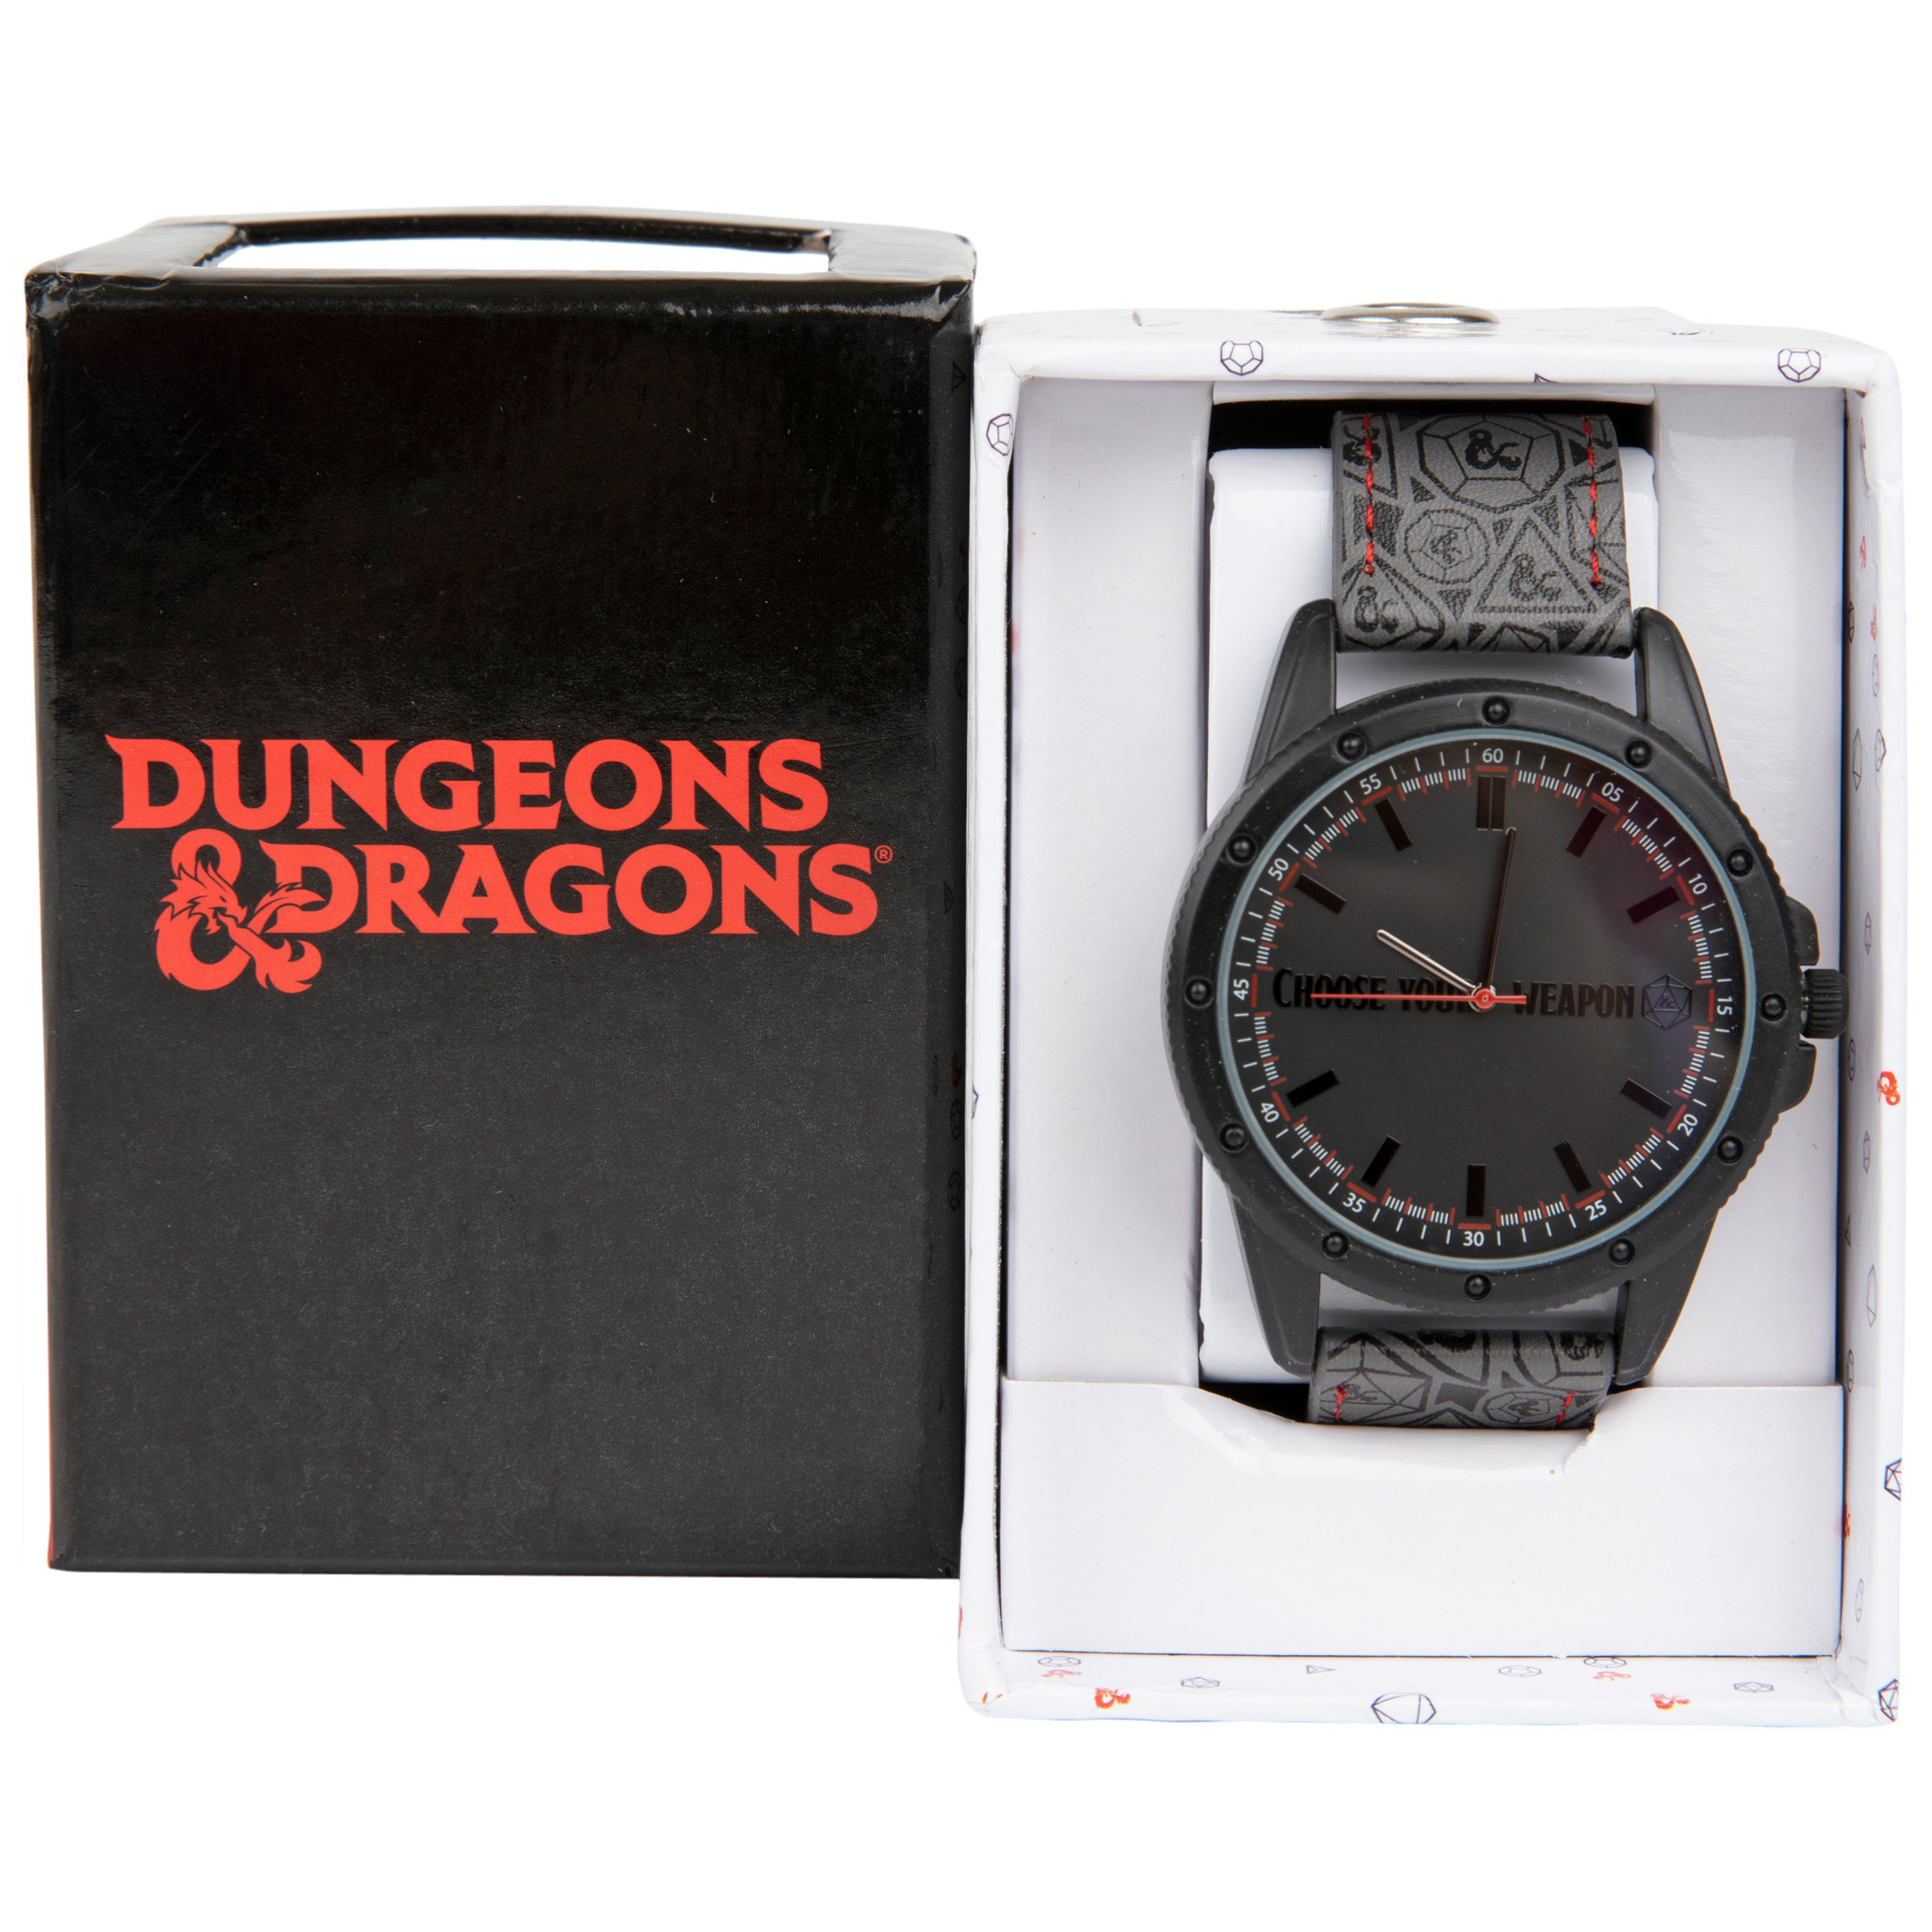 Dungeons & Dragons Analog Watch Face with Symbol Pattern Wrist Band